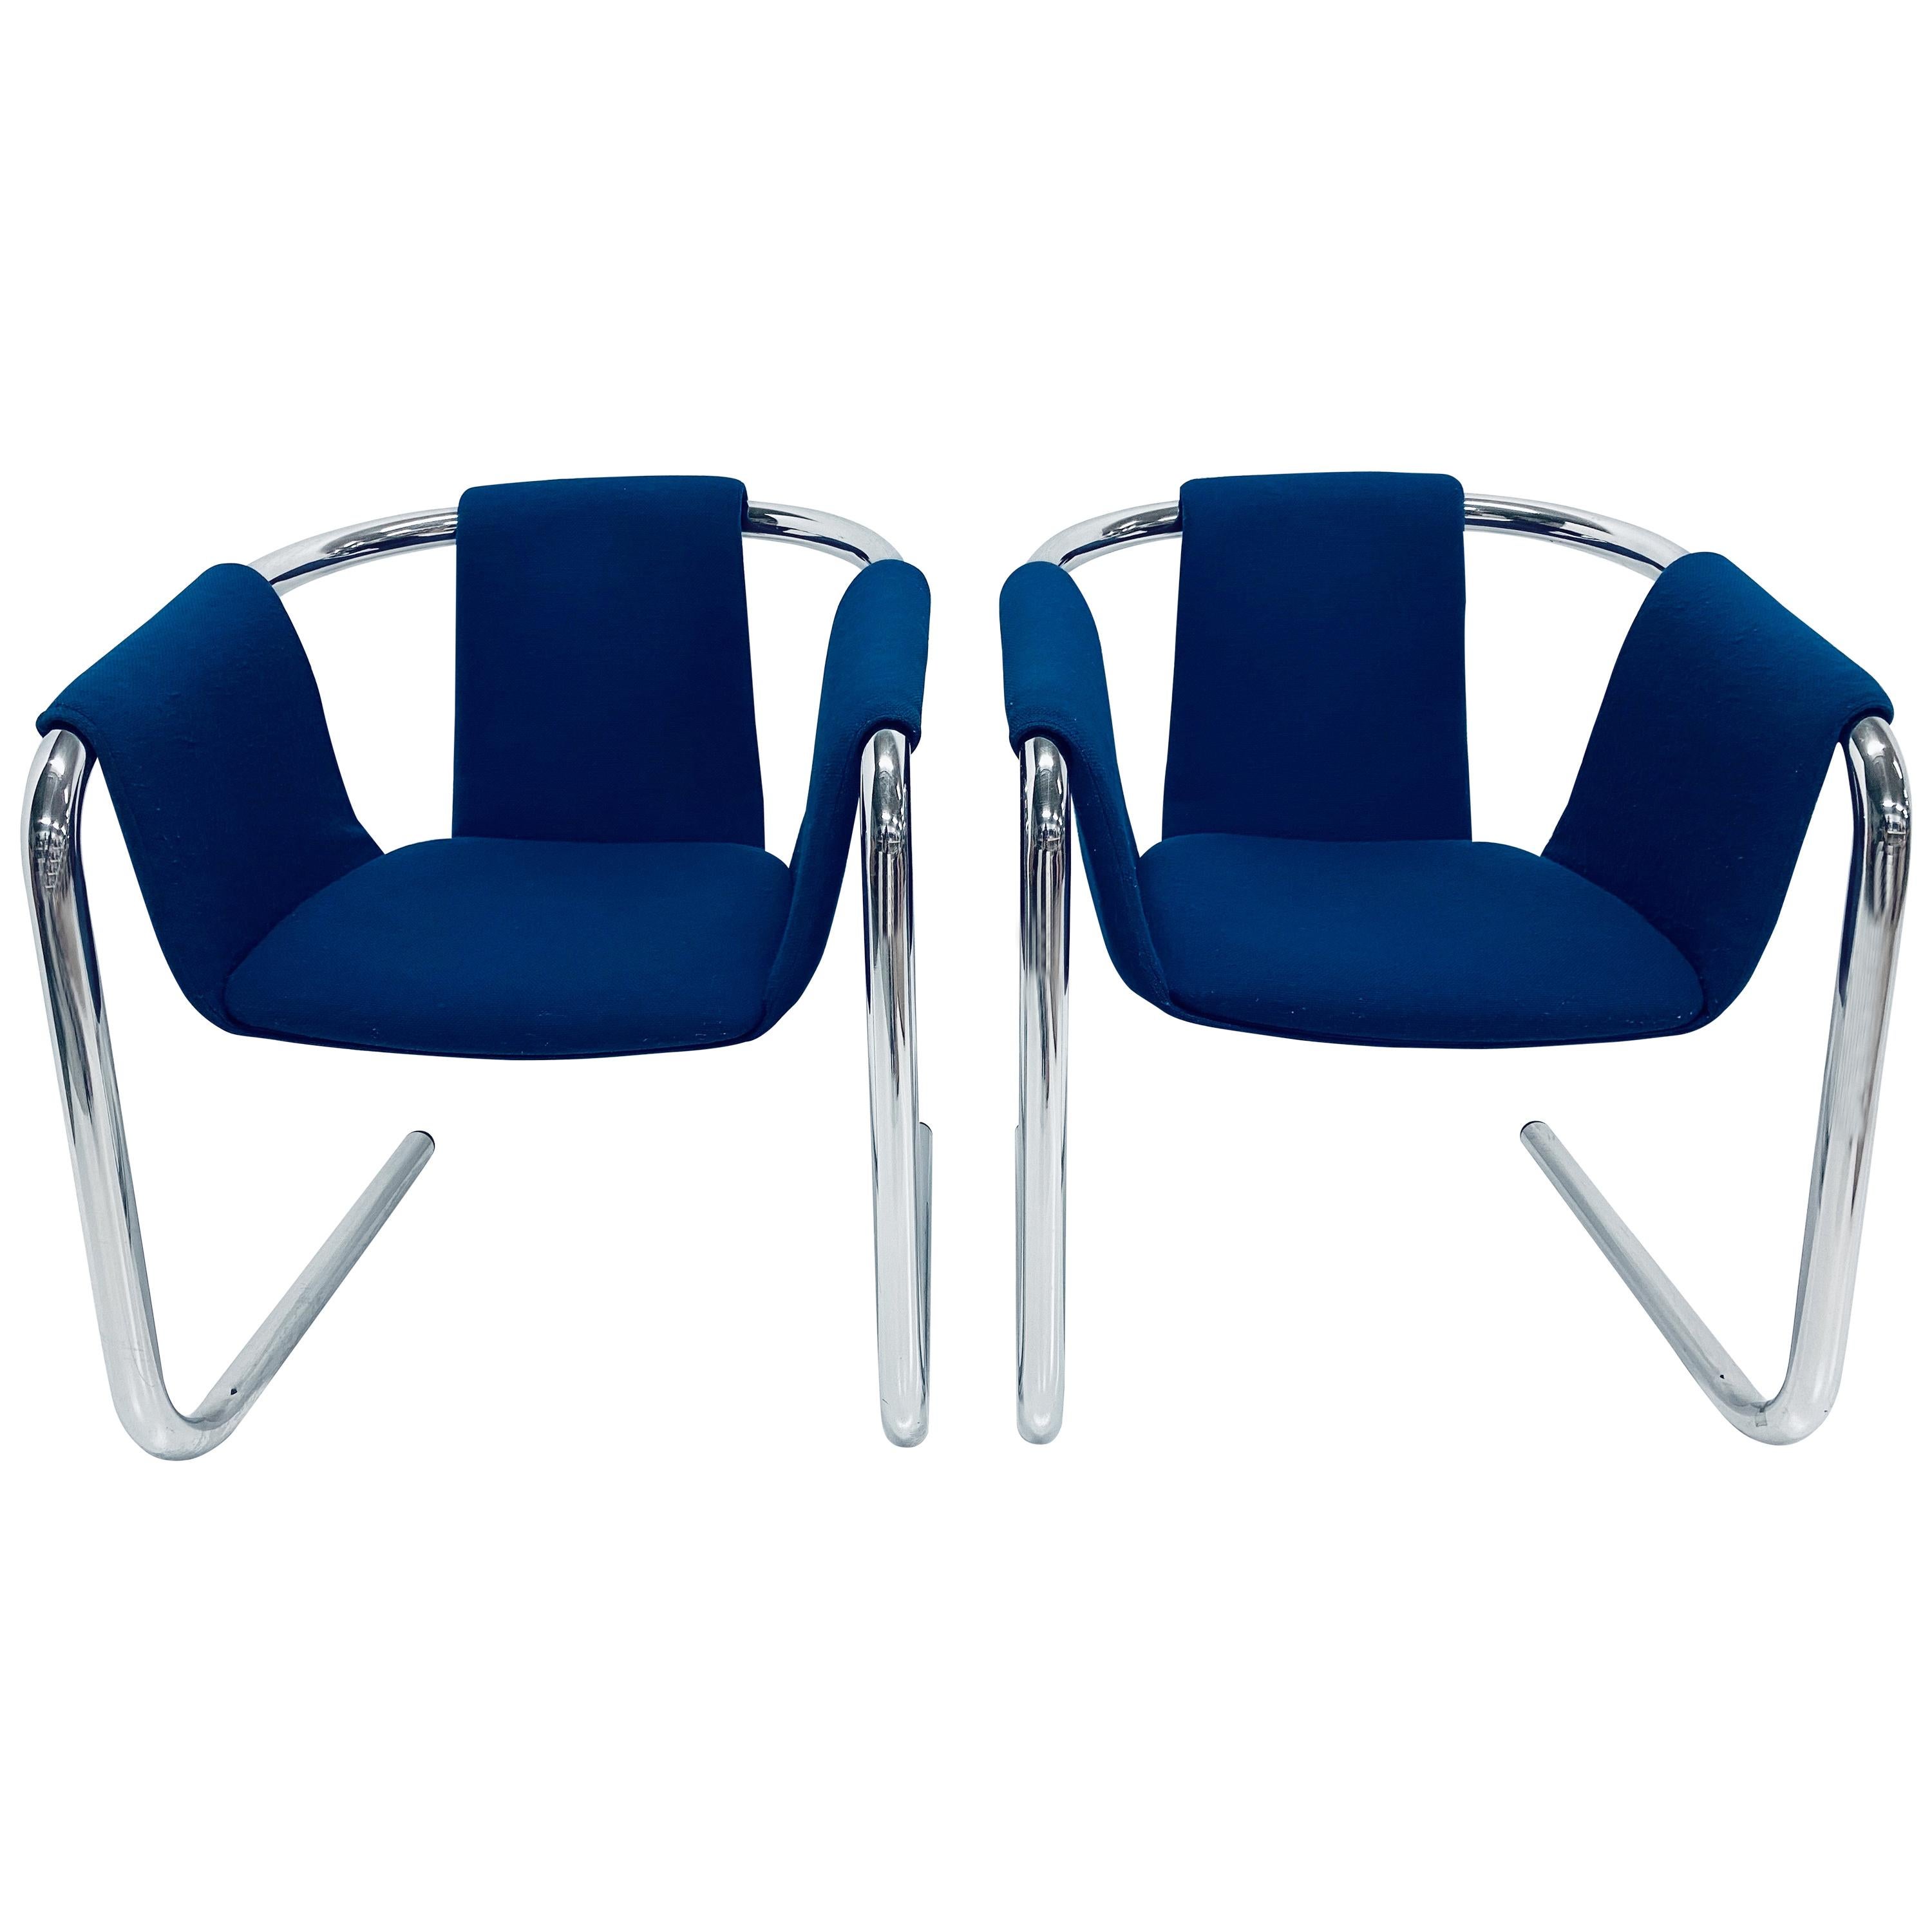 Pair of "Zermatt" Tubular Chrome and Blue Wool Fabric Sling Armchairs by Vecta